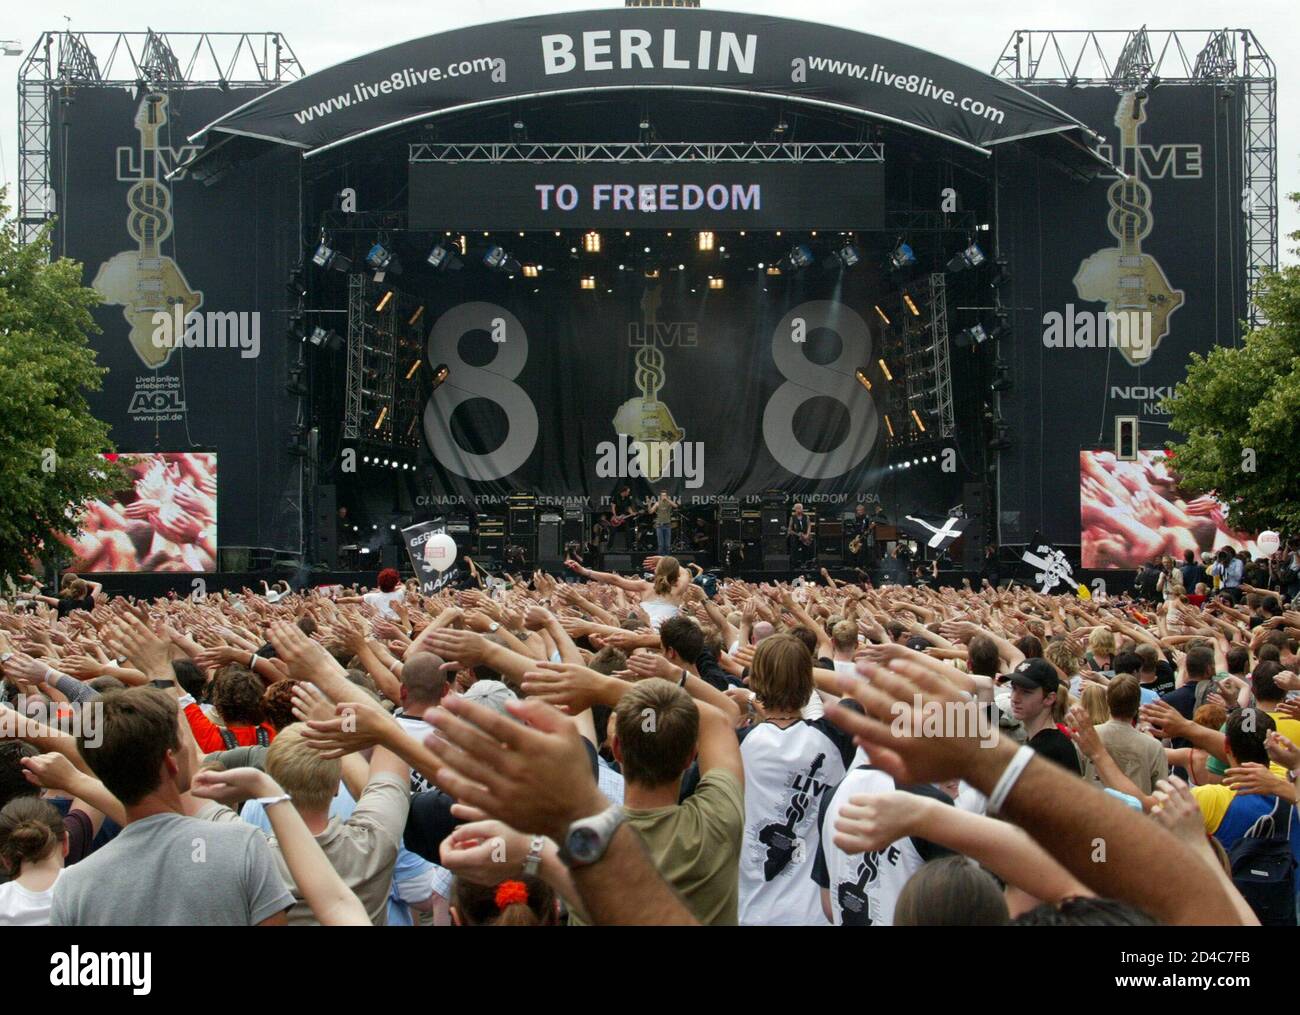 German band 'Die Toten Hosen' performs during the Live 8 concert in front  of the Victory column in Berlin, July 2, 2005. A galaxy of rock and roll  stars will grace stages